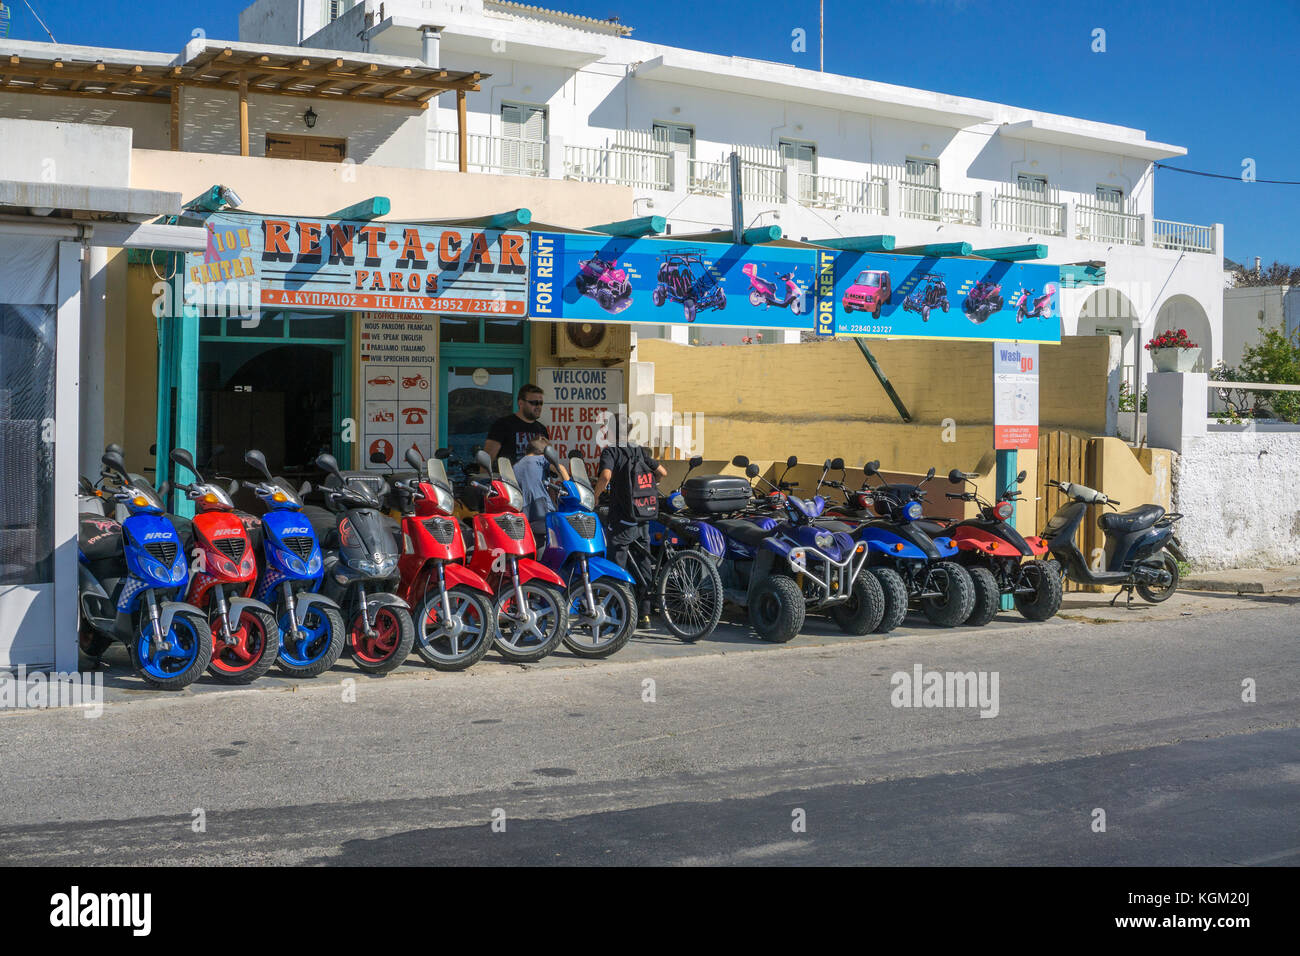 Scooter rental shop at the harbour of Parikia, Paros island, Cyclades, Aegean, Greece Stock Photo